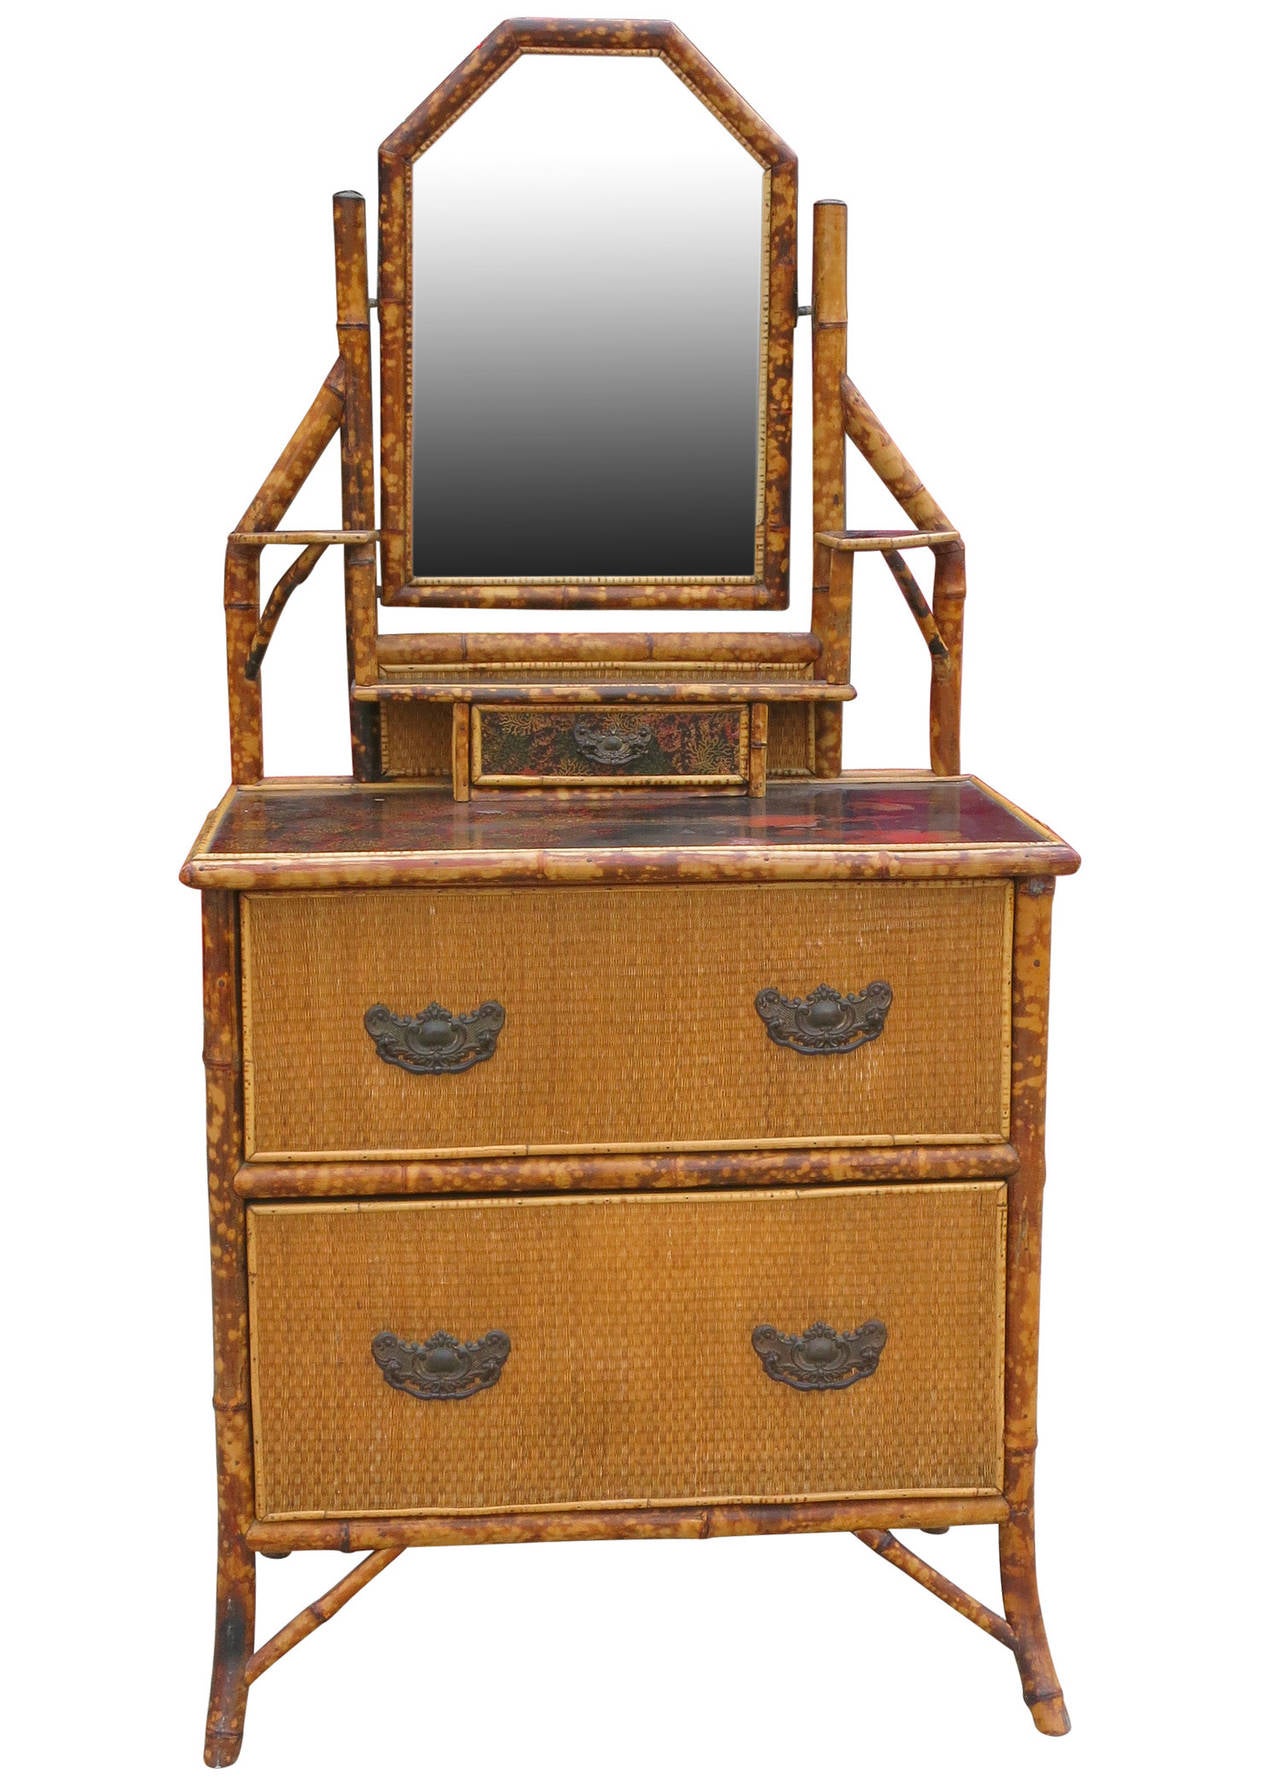 This late Victorian tortoiseshell bamboo chest has a black laquer top, grass-mat covered sides, and iron drawer pulls. The chest comes with a built-in vanity mirror complete with two small side shelves and small center drawer for jewelry.